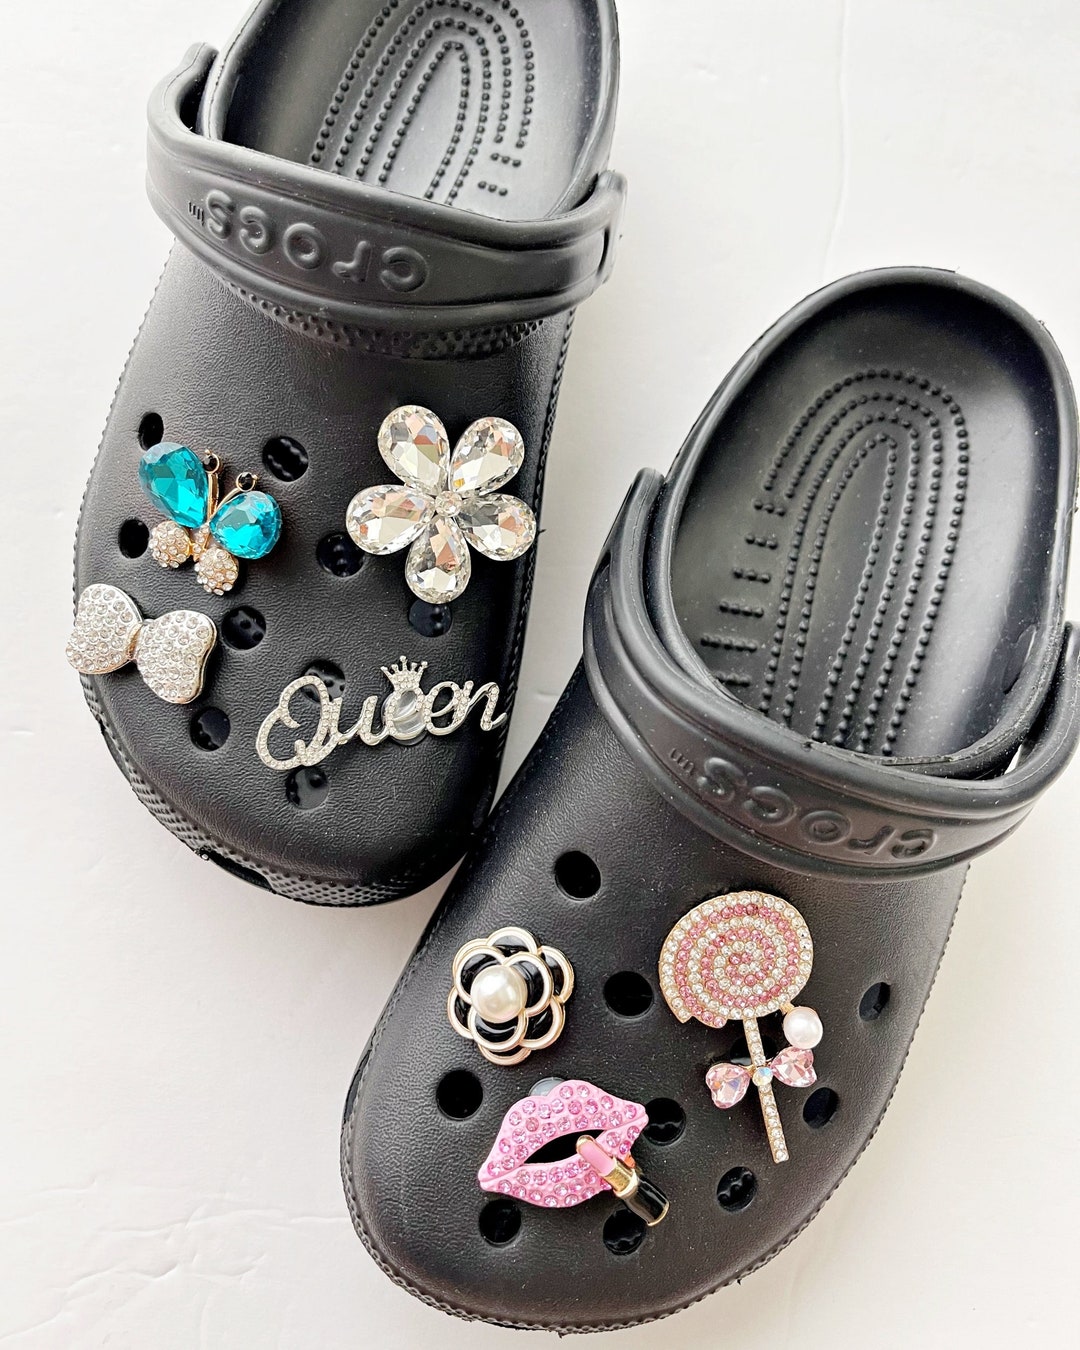 Bling Shoes Charms for Croc Shoes Decoration/Diamond Charms for Girls and Women/Luxury Sandal Charms with Luxury Clog Accessories/Women Girls Party